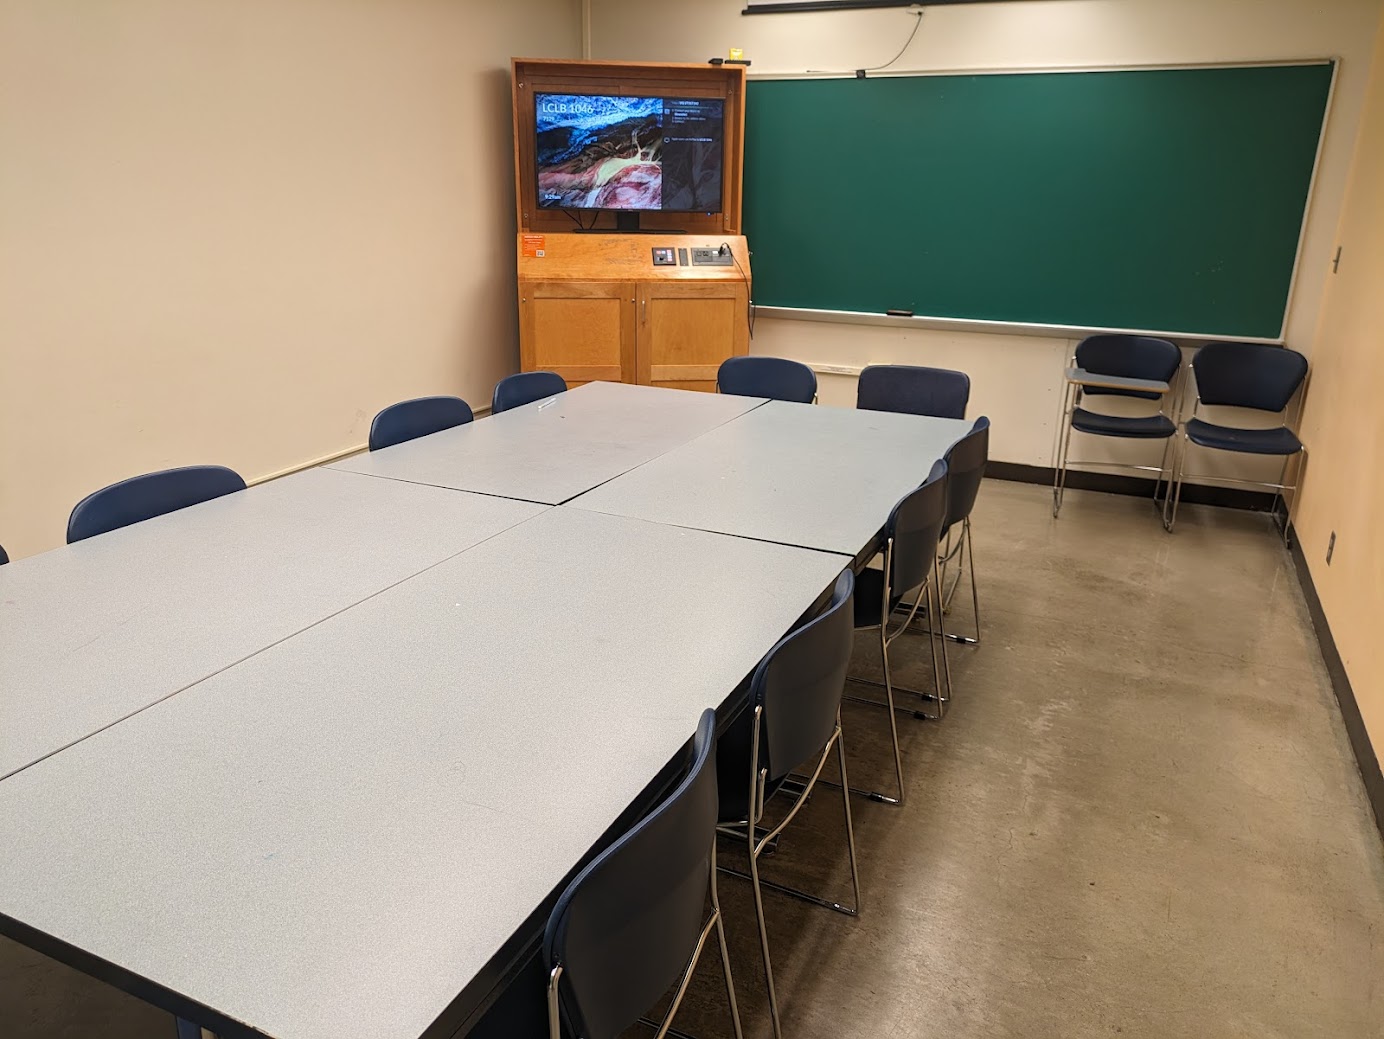 A view of the classroom with conference style student seating, a high definition LCD monitor, and a chalkboard